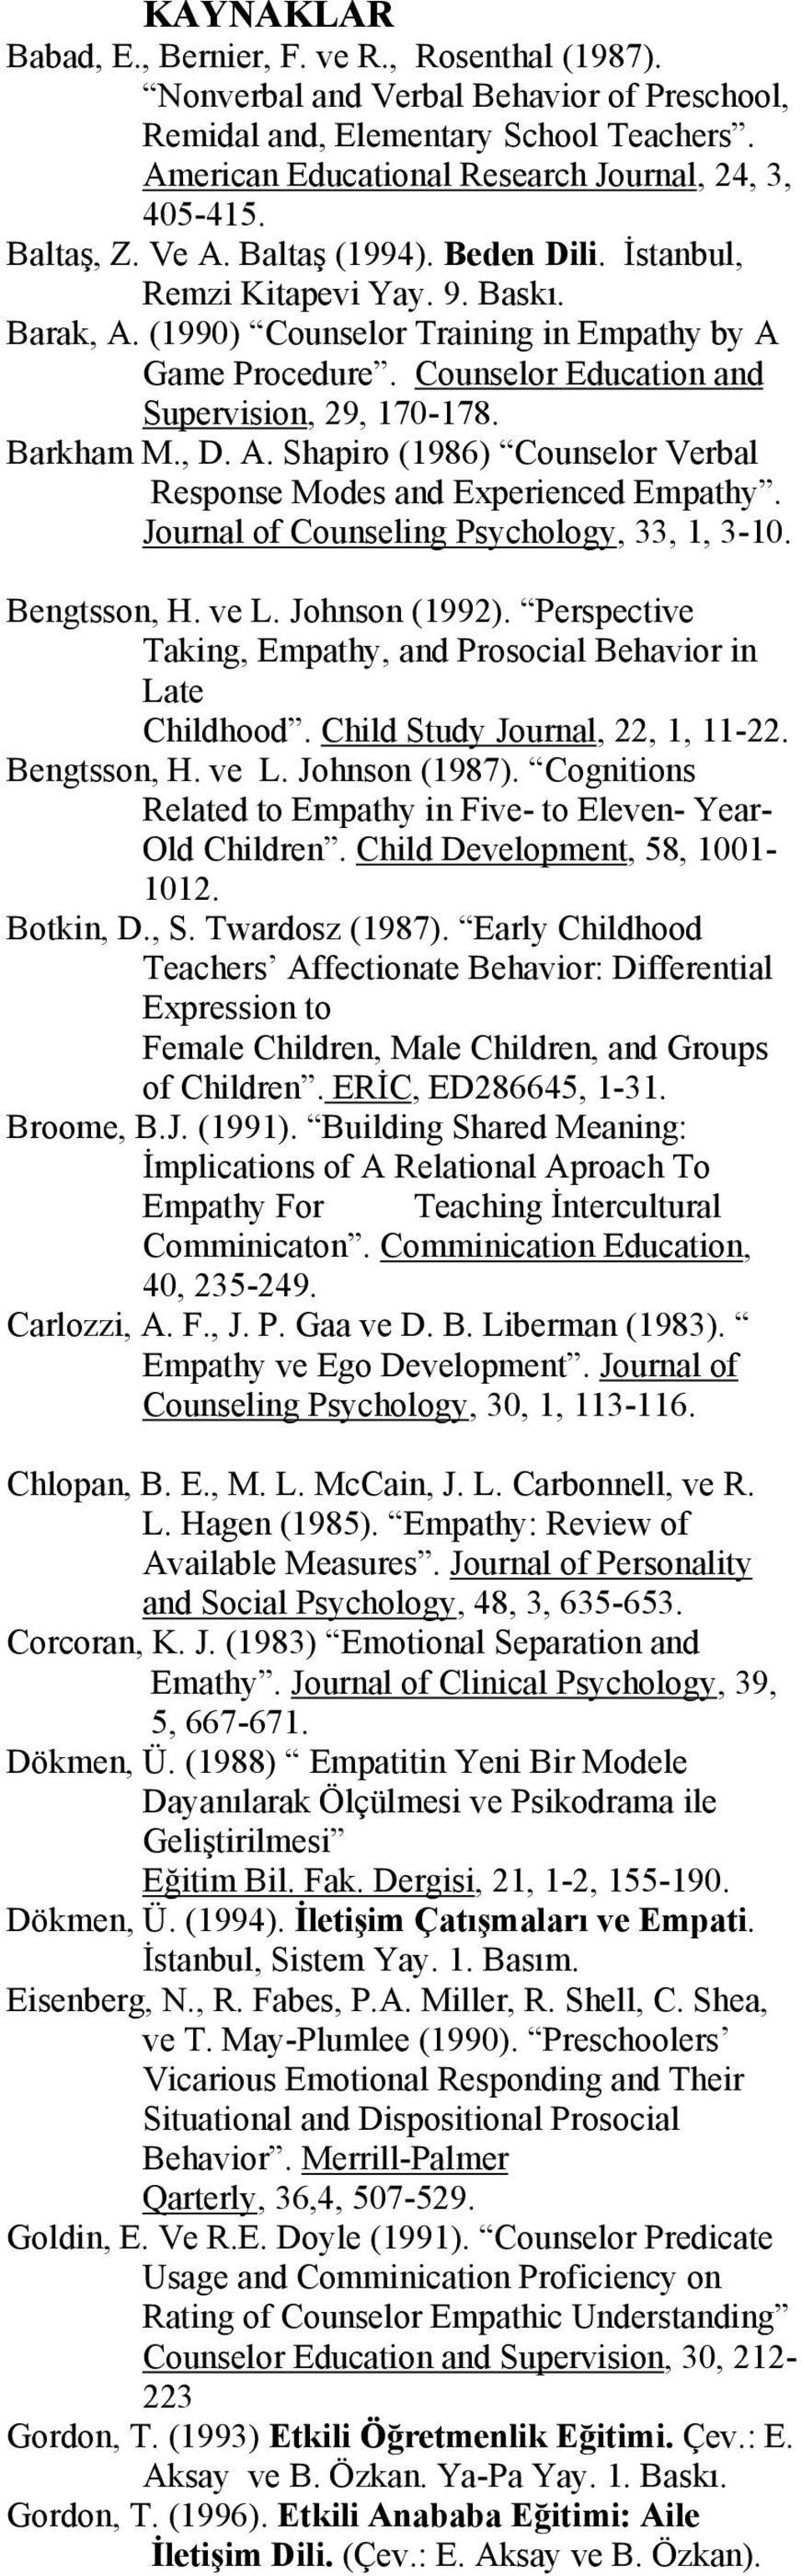 Counselor Education and Supervision, 29, 170-178. Barkham M., D. A. Shapiro (1986) Counselor Verbal Response Modes and Experienced Empathy. Journal of Counseling Psychology, 33, 1, 3-10. Bengtsson, H.